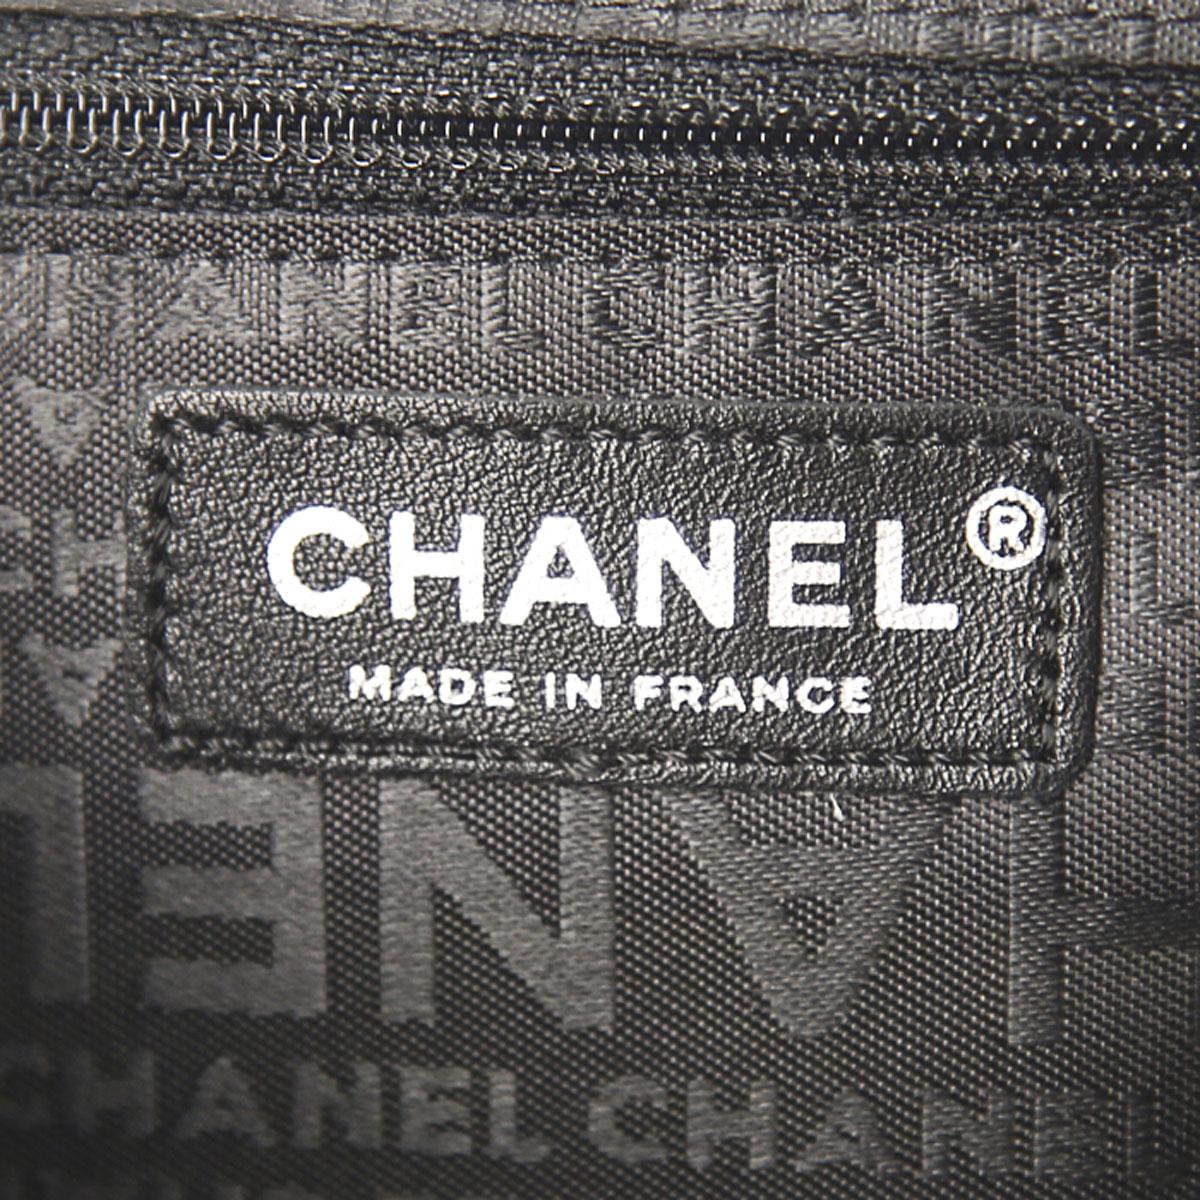 Chanel Classic Flap Limited Edition 2005 Black & White Grey Tweed Fur Lizard Bag For Sale 5